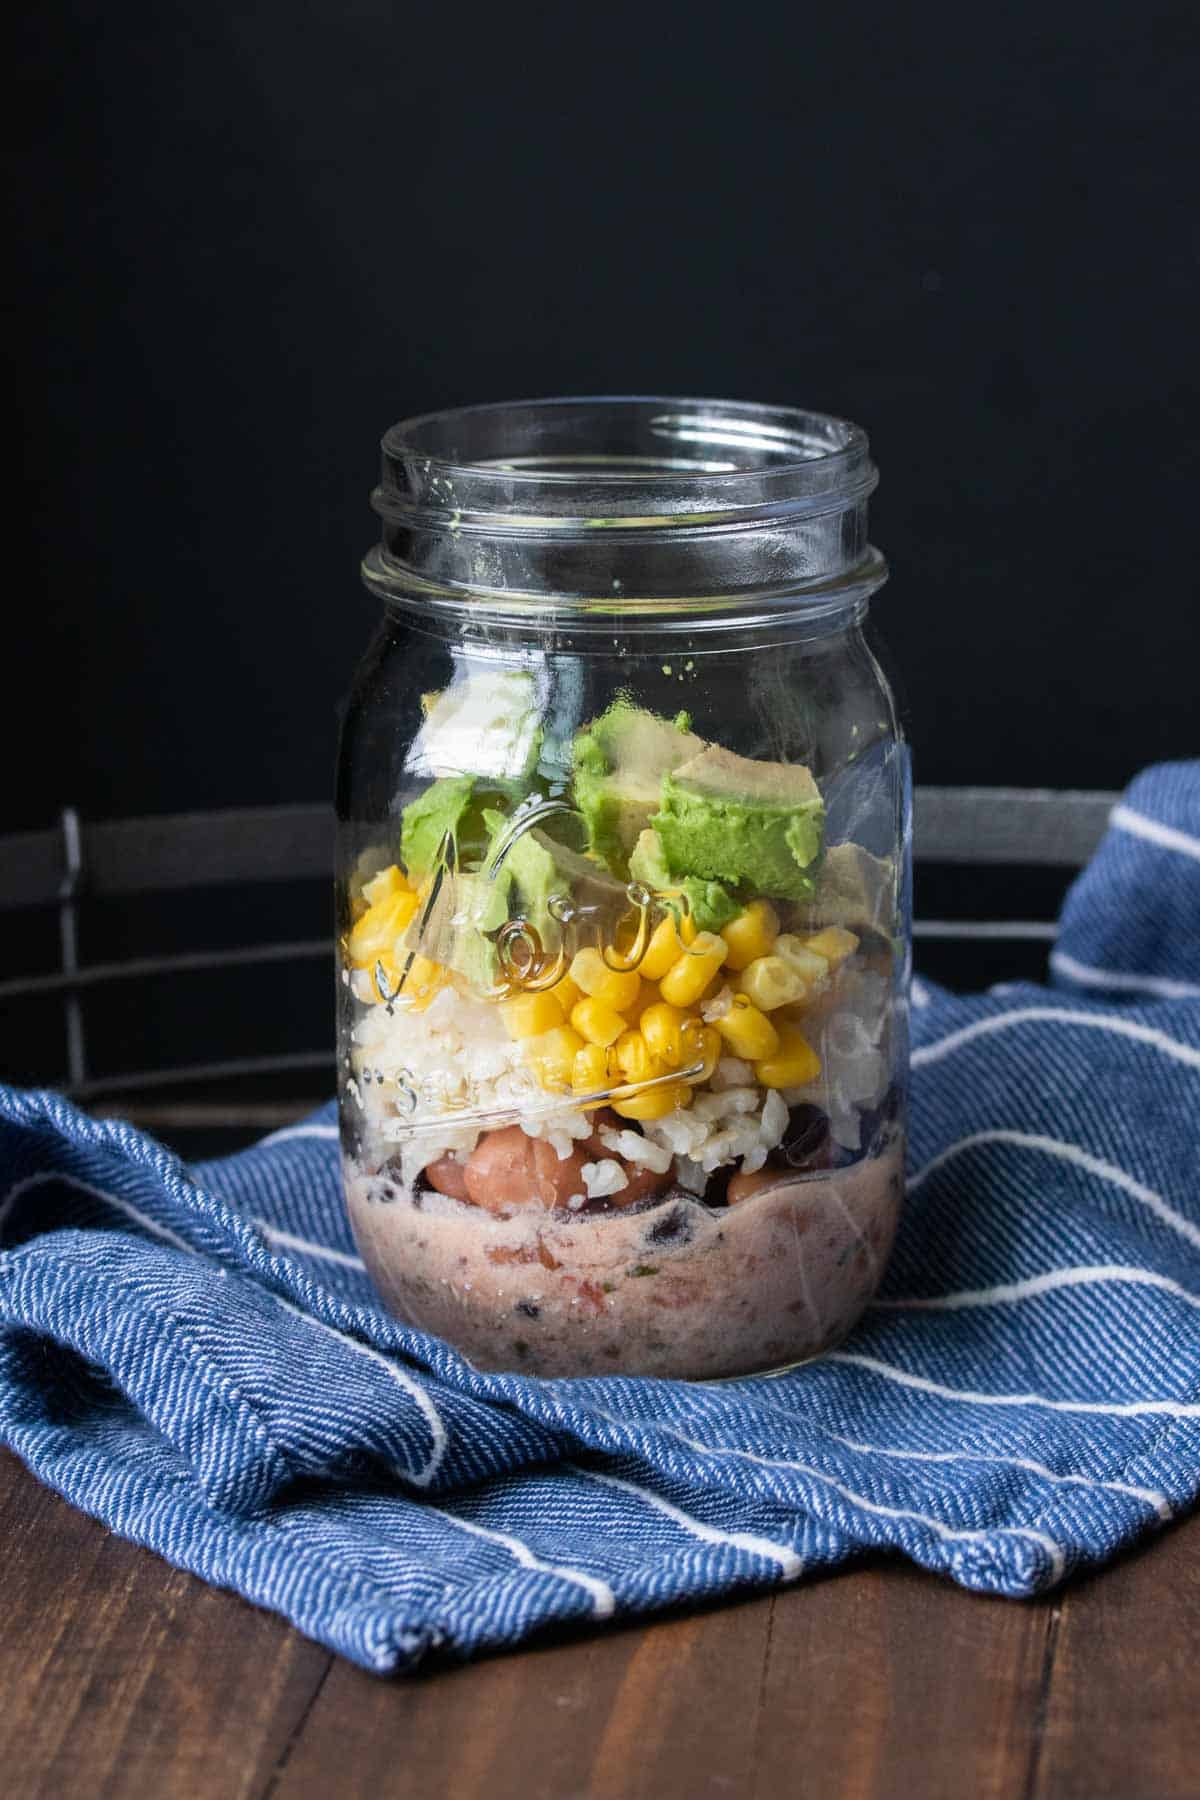 A glass jar on a blue towel filled with beans, rice, corn and avocado.